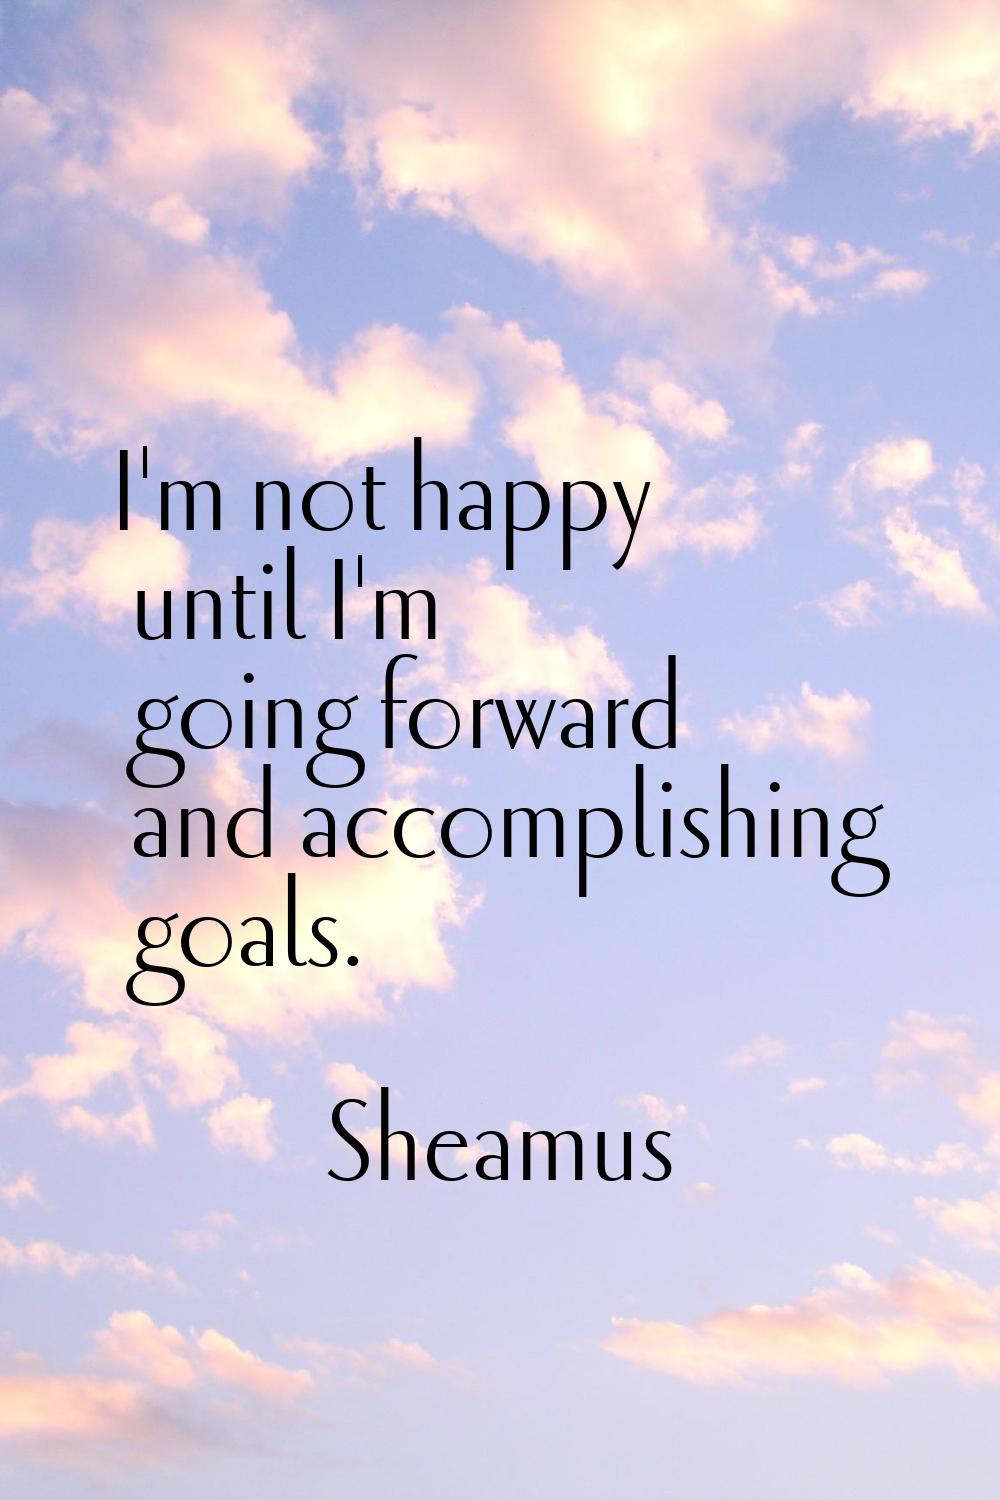 I'm not happy until I'm going forward and accomplishing goals.